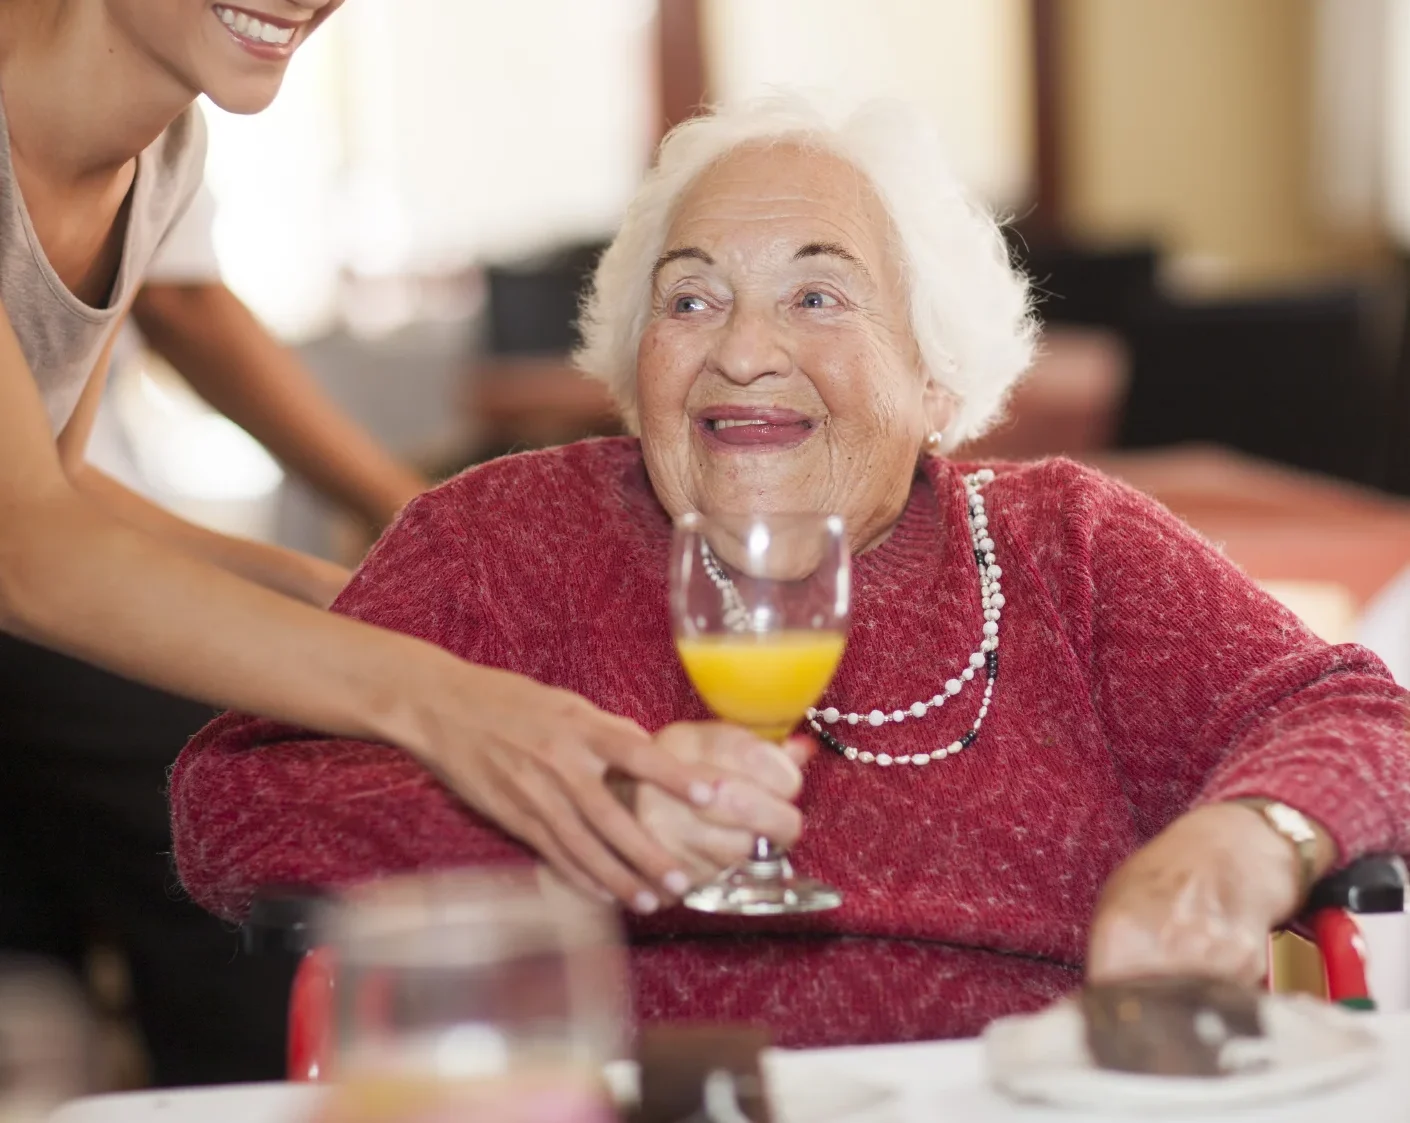 Caregiver assisting senior woman with drinking her orange juice